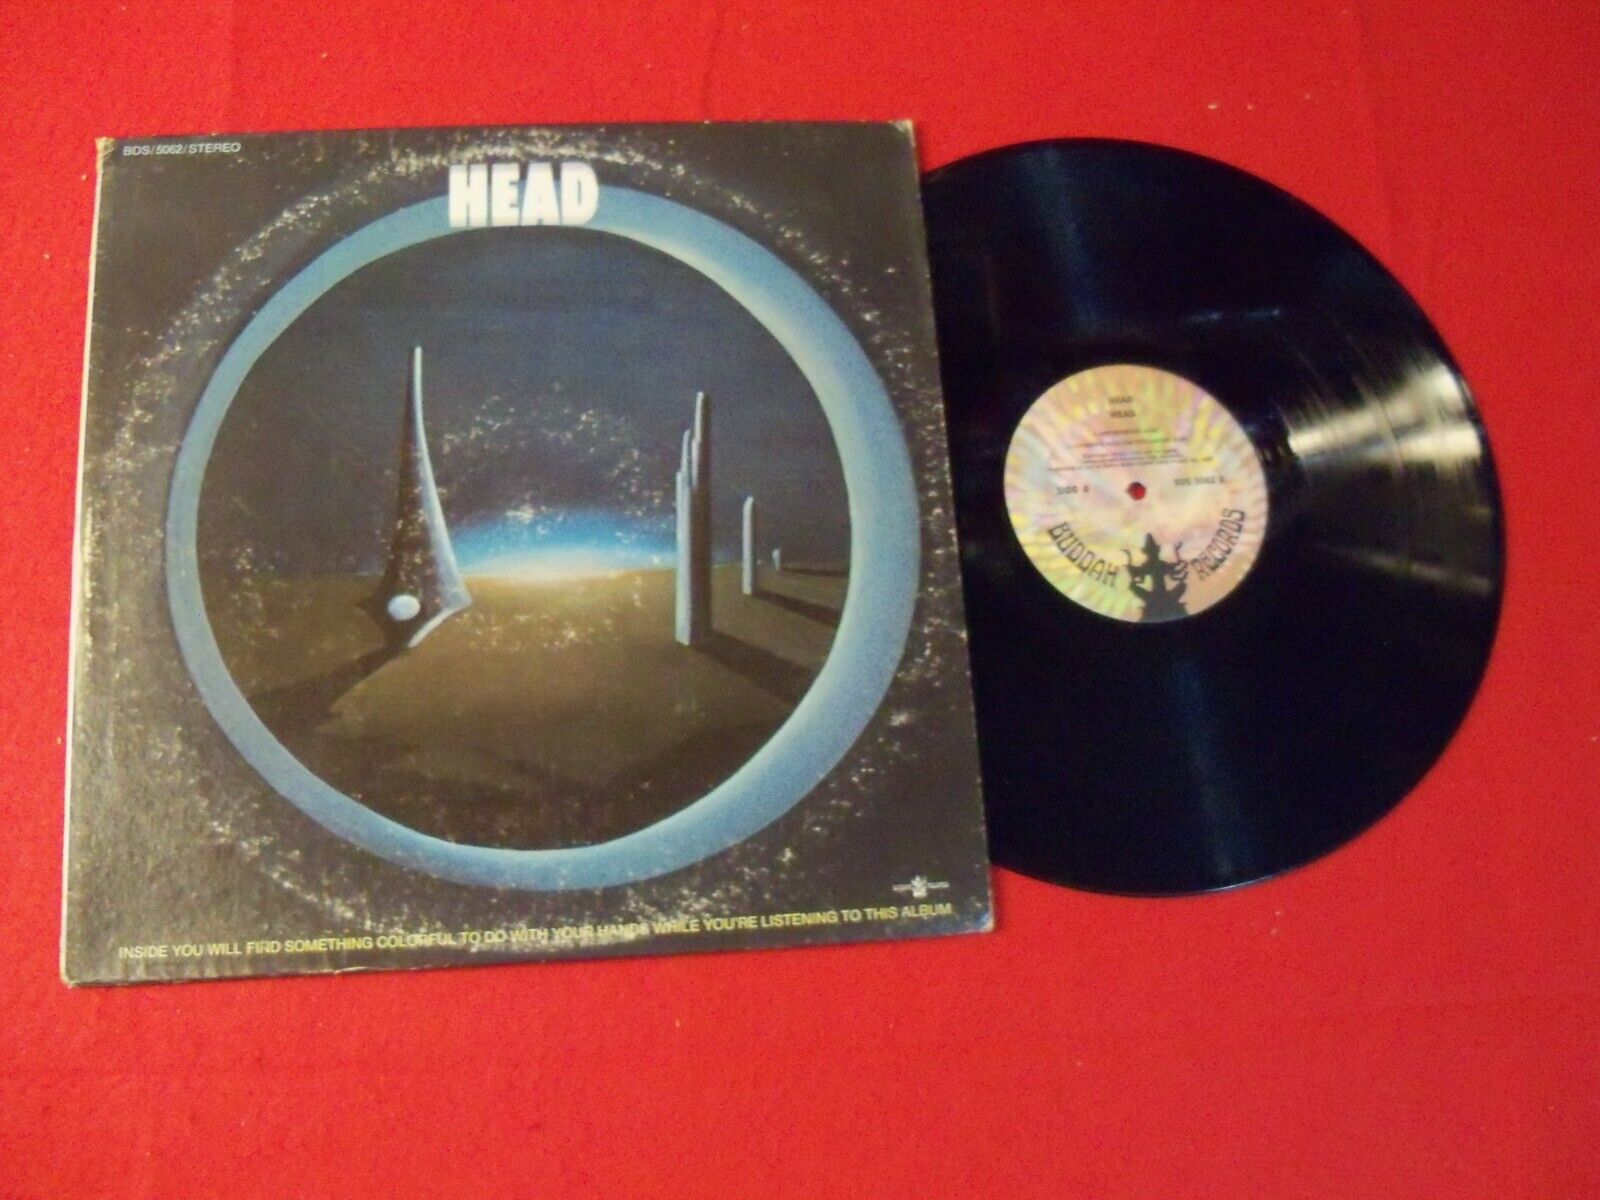 BUDDAH RECORDS 1970 LP "HEAD" ON CLASSIC PSYCH ROCK VINTAGE VINYL! ART IN SPACE!